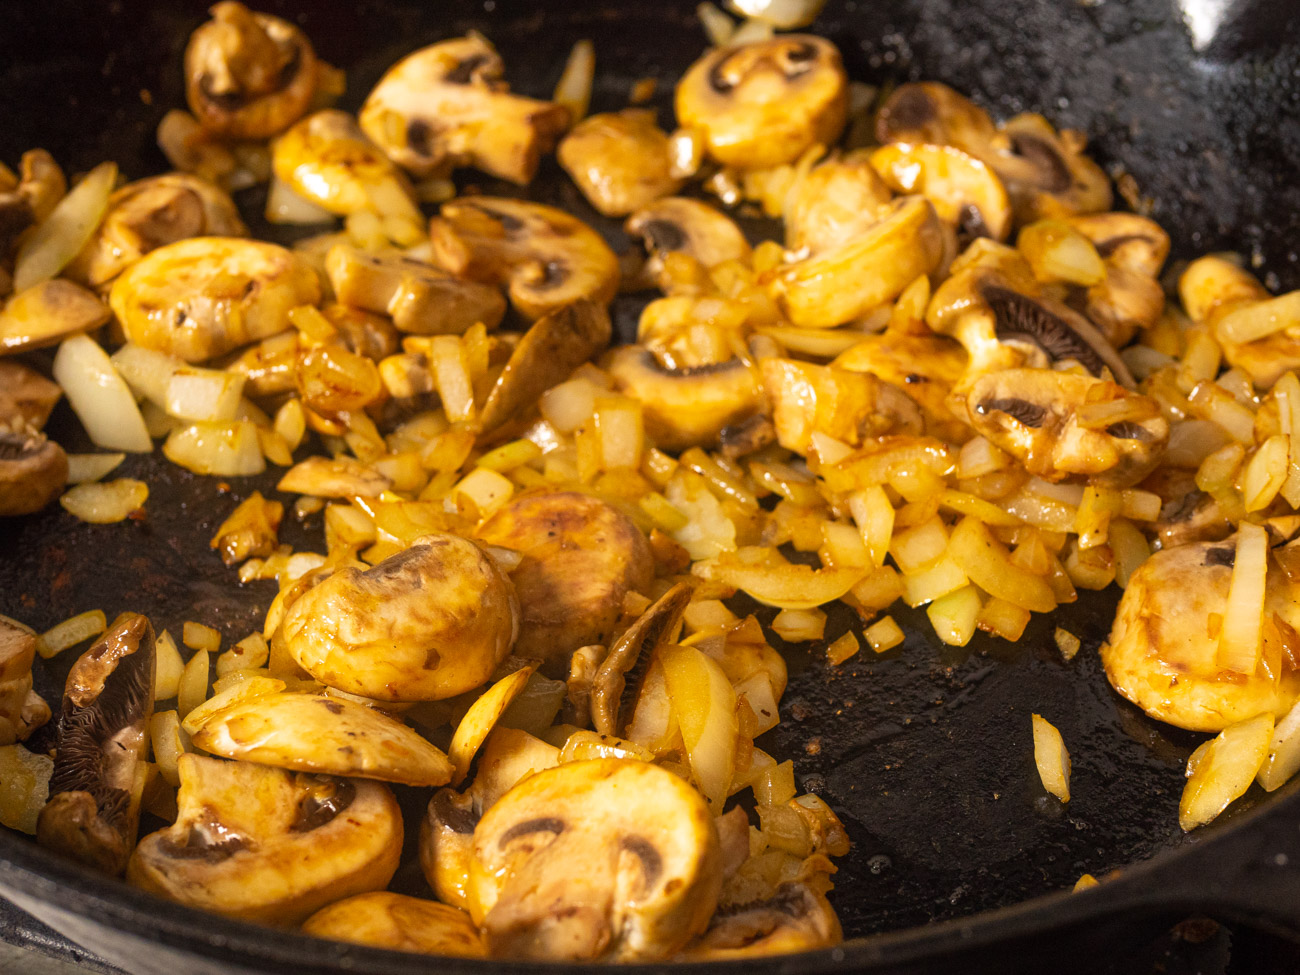 Add onion and cook until starting to soften, about 3 minutes. Add mushrooms, season with salt, and cook 5 minutes.